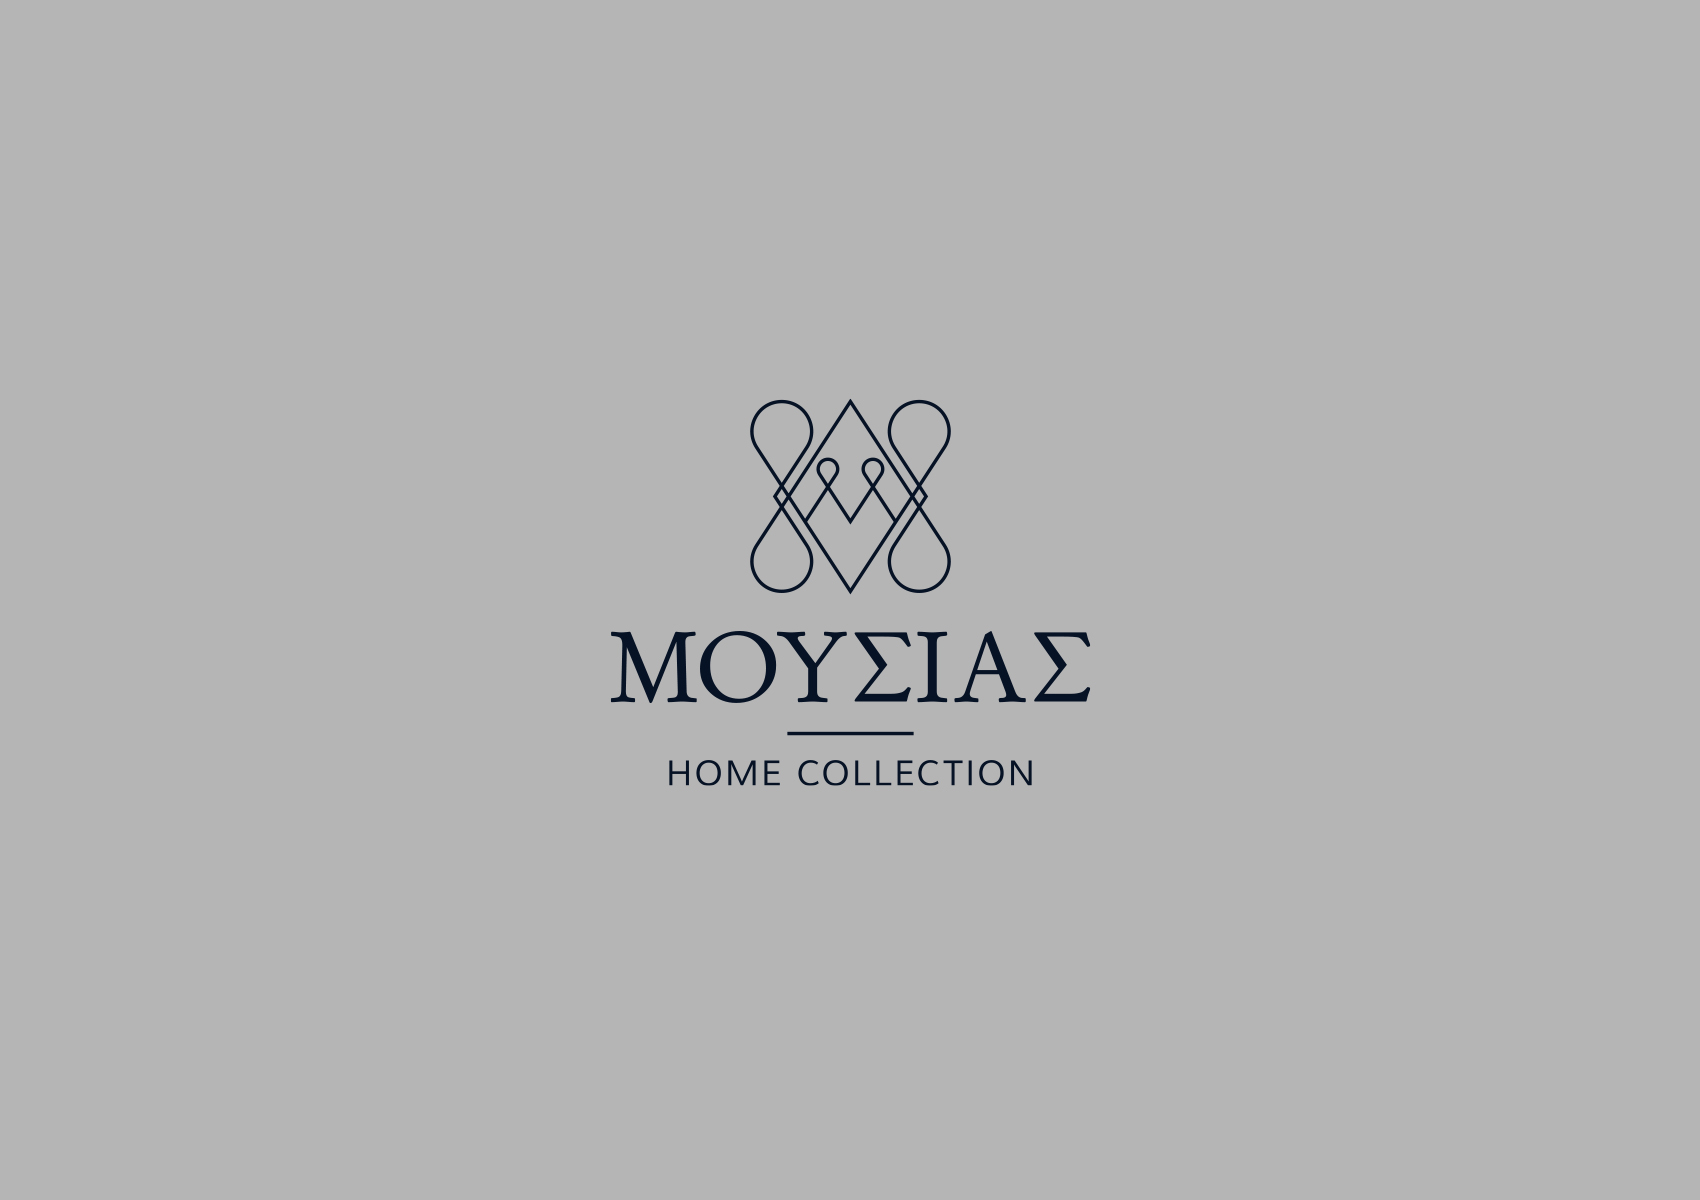 Moussias Home Collection grey logo 1700x1200 by xhristakis